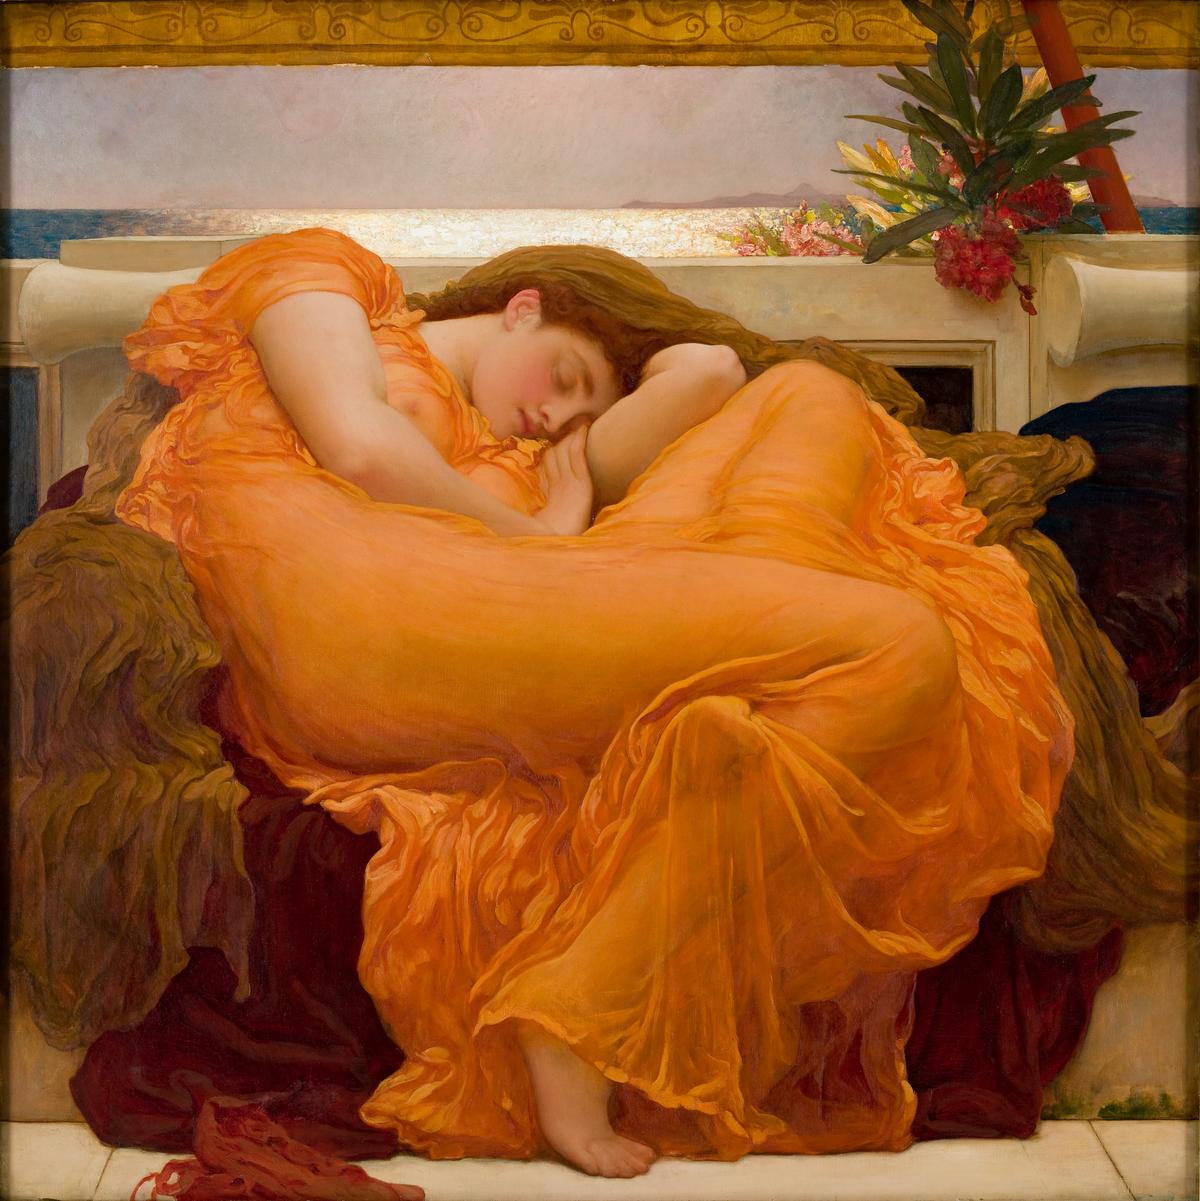 "Flaming June," 1895, by Frederic Leighton. Oil on canvas. Museo de Arte de Ponce, Ponce, Puerto Rico. (Public Domain)